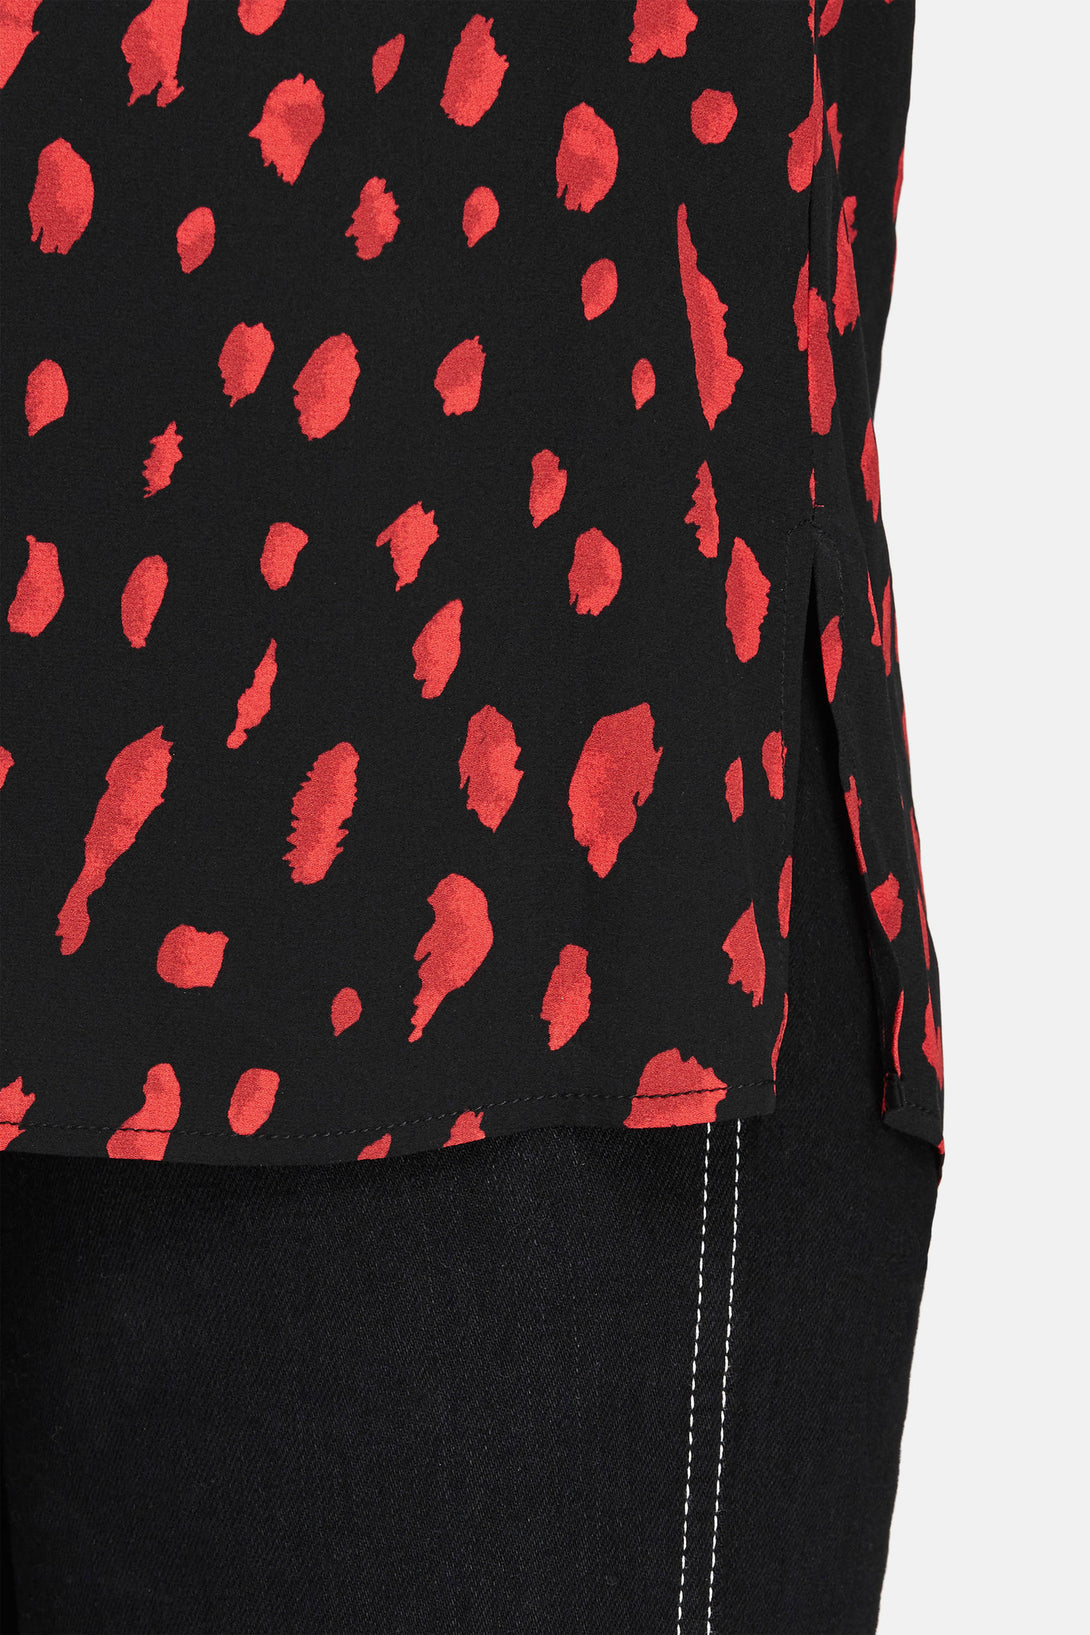 Button Up - Black/Red Print – The Line